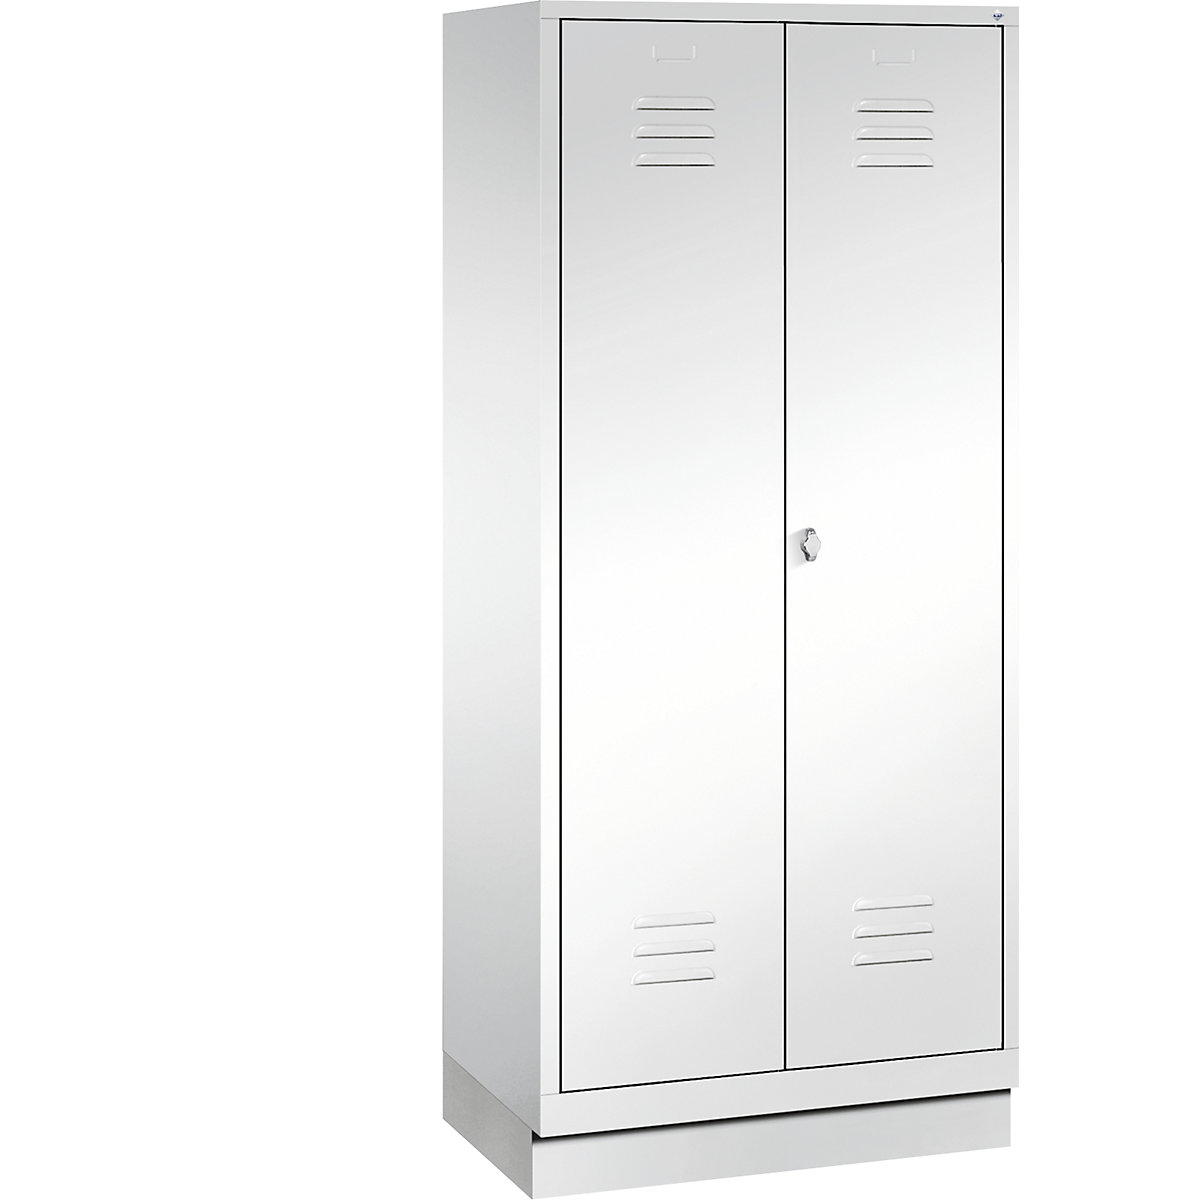 CLASSIC cloakroom locker with plinth, doors close in the middle - C+P